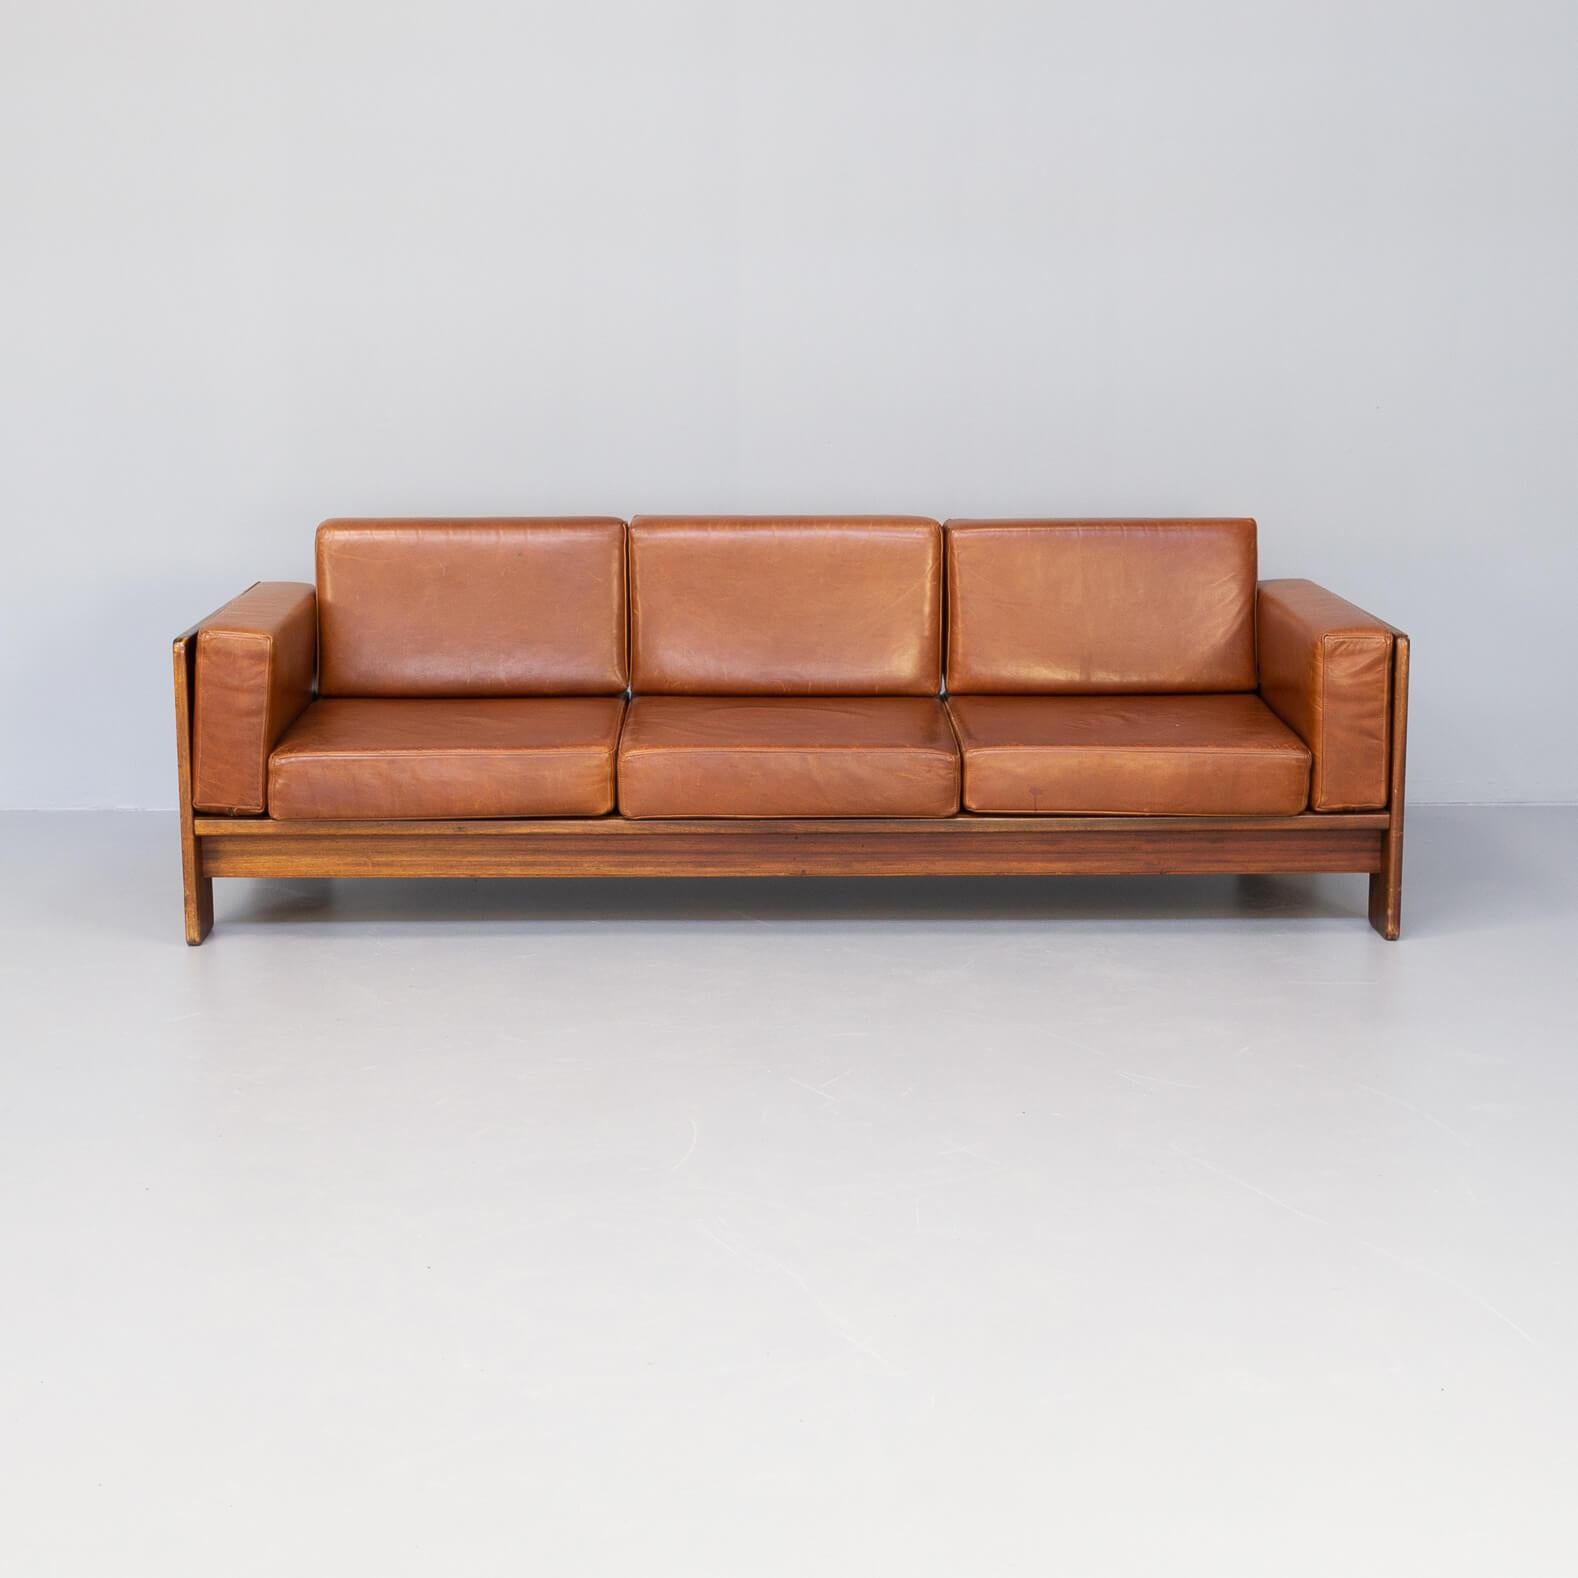 60s Tobia Scarpa ‘Bastiano’ Sofa, Fauteuil & Sidetable Set for Knoll For Sale 2